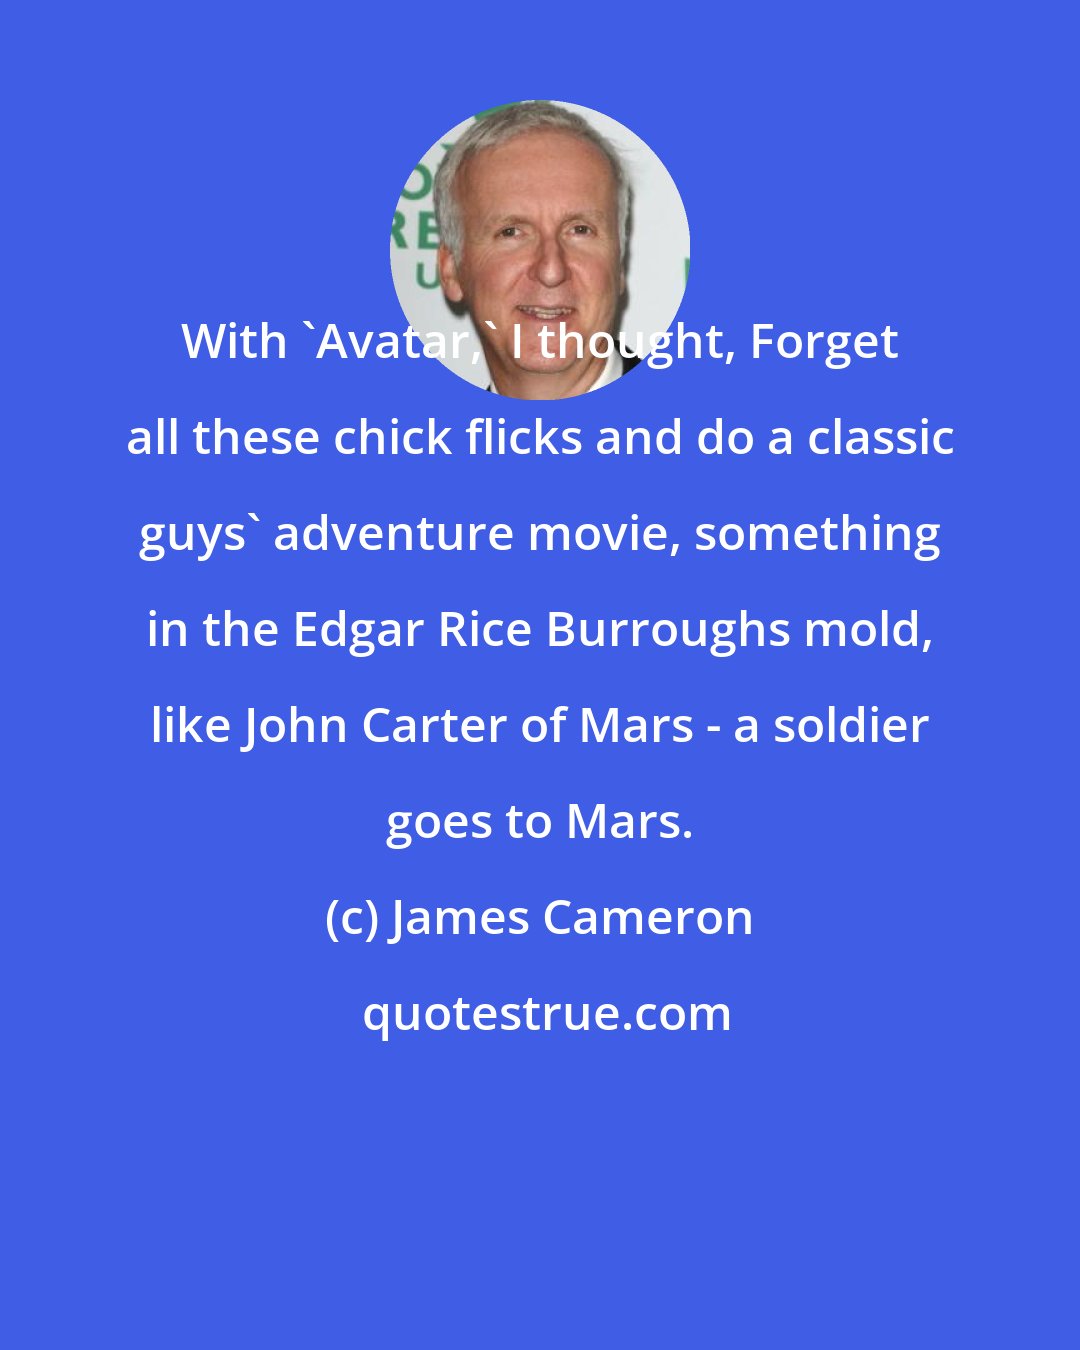 James Cameron: With 'Avatar,' I thought, Forget all these chick flicks and do a classic guys' adventure movie, something in the Edgar Rice Burroughs mold, like John Carter of Mars - a soldier goes to Mars.